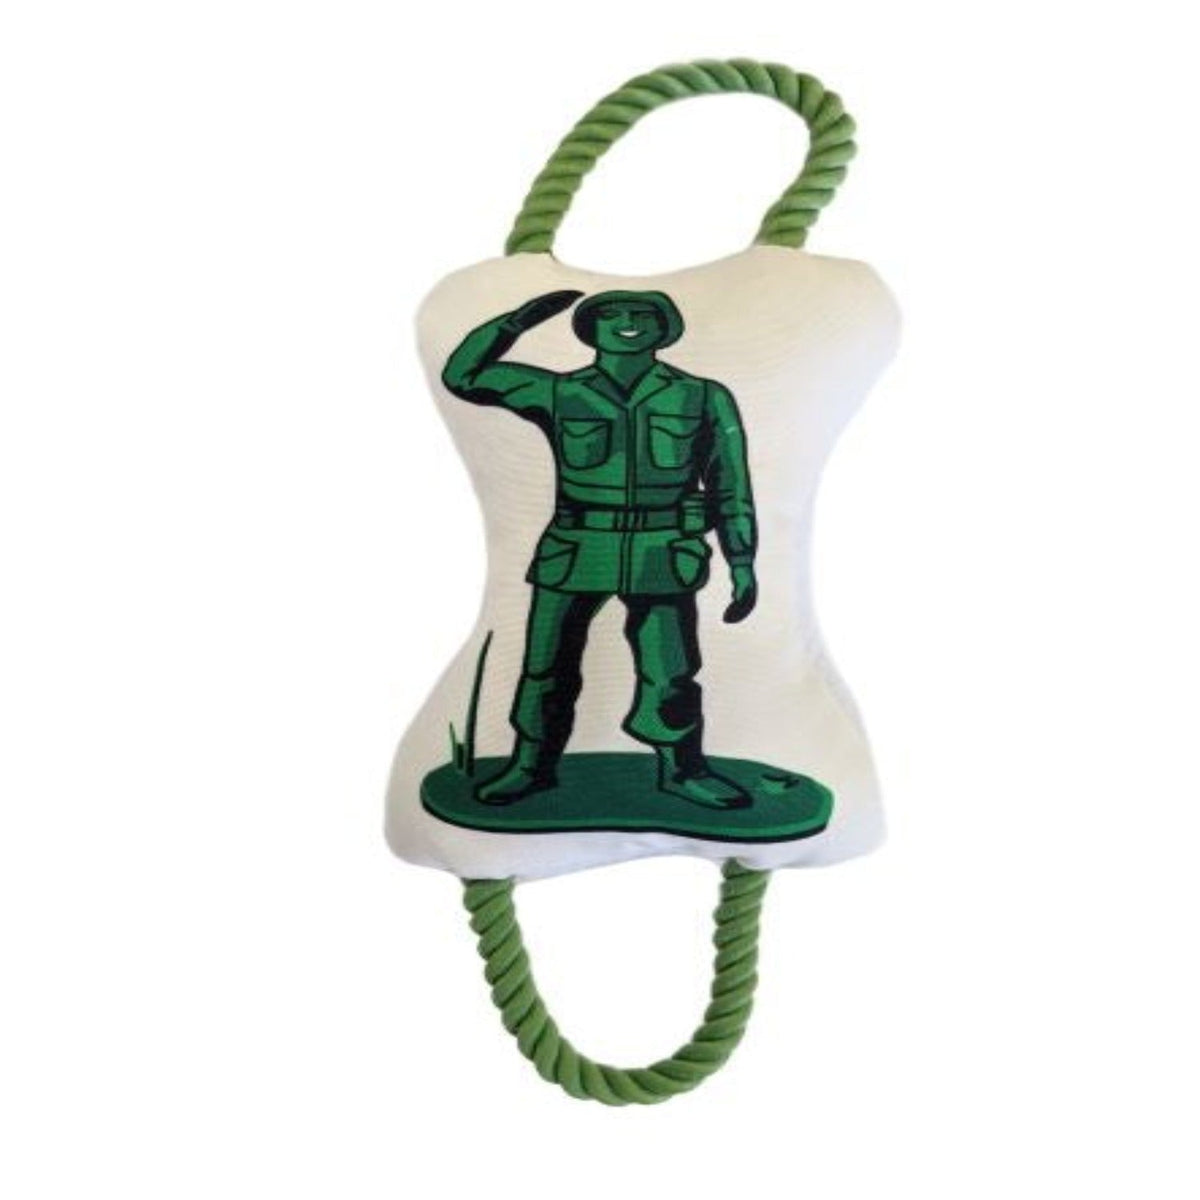 Retro Soldier Plush Dog and Puppy Toy by American Pet Supplies